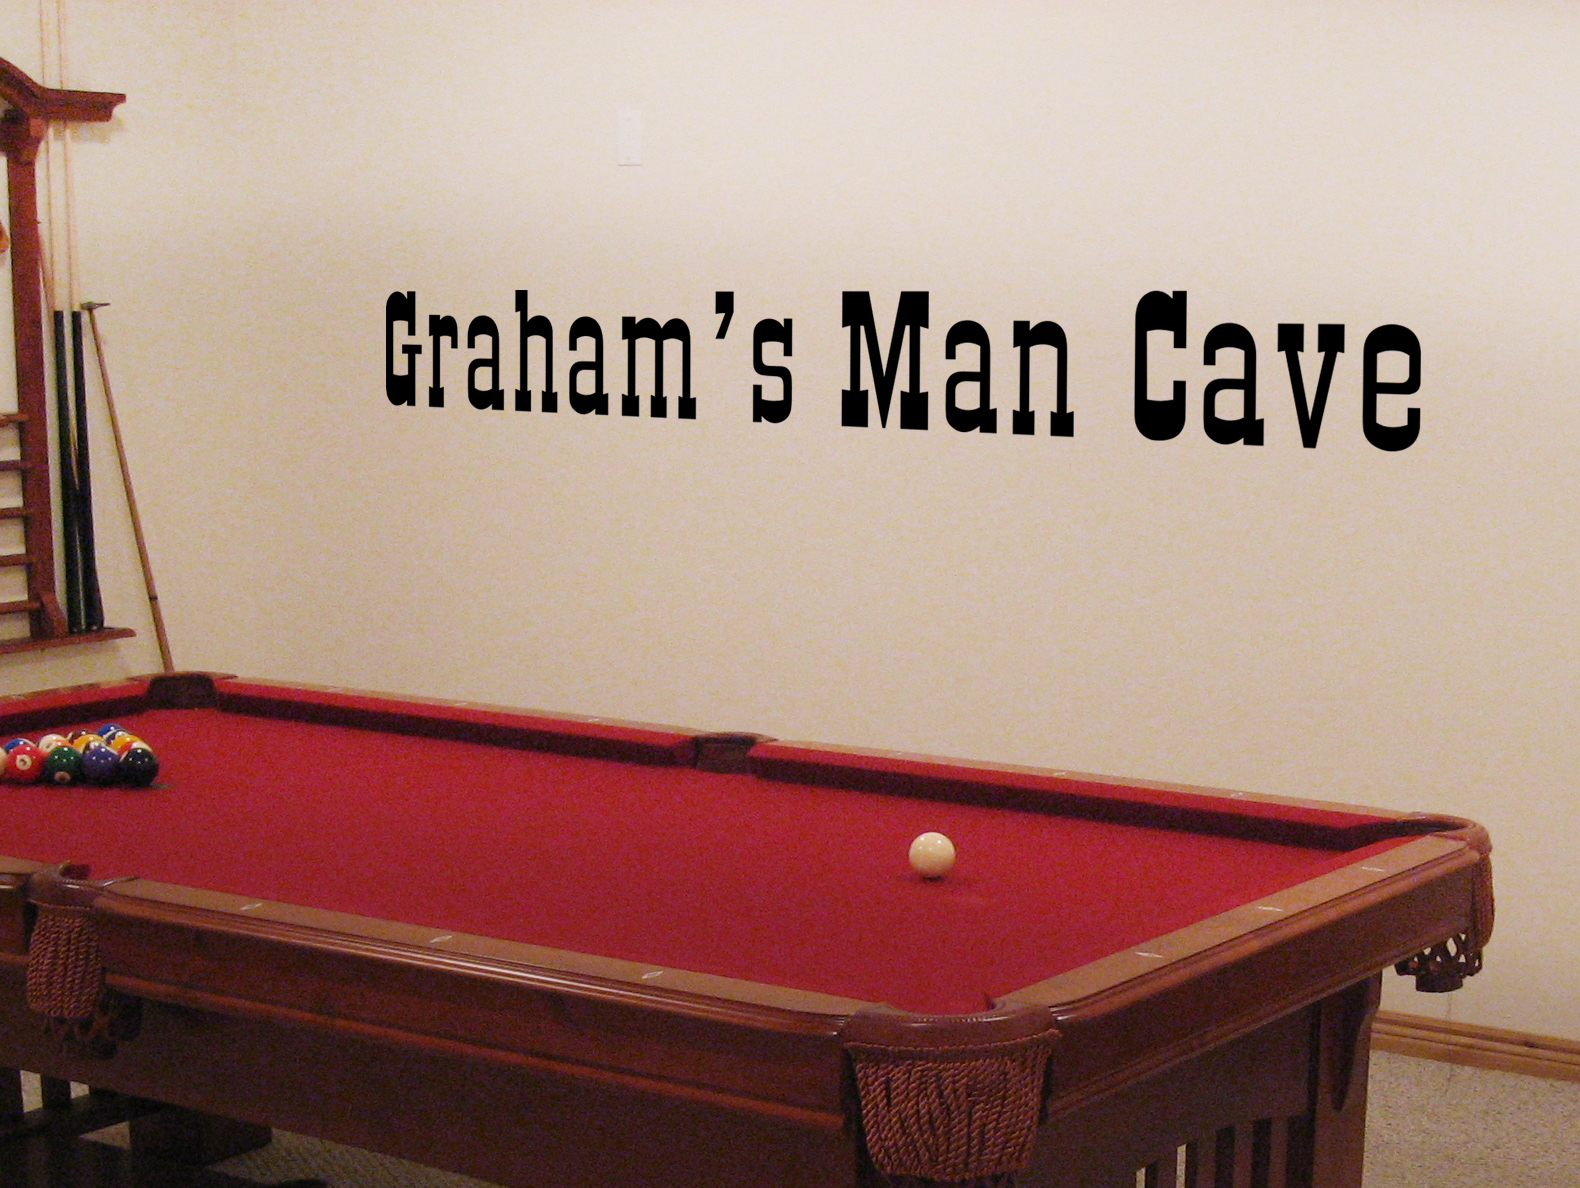 Man Cave Wall Decal